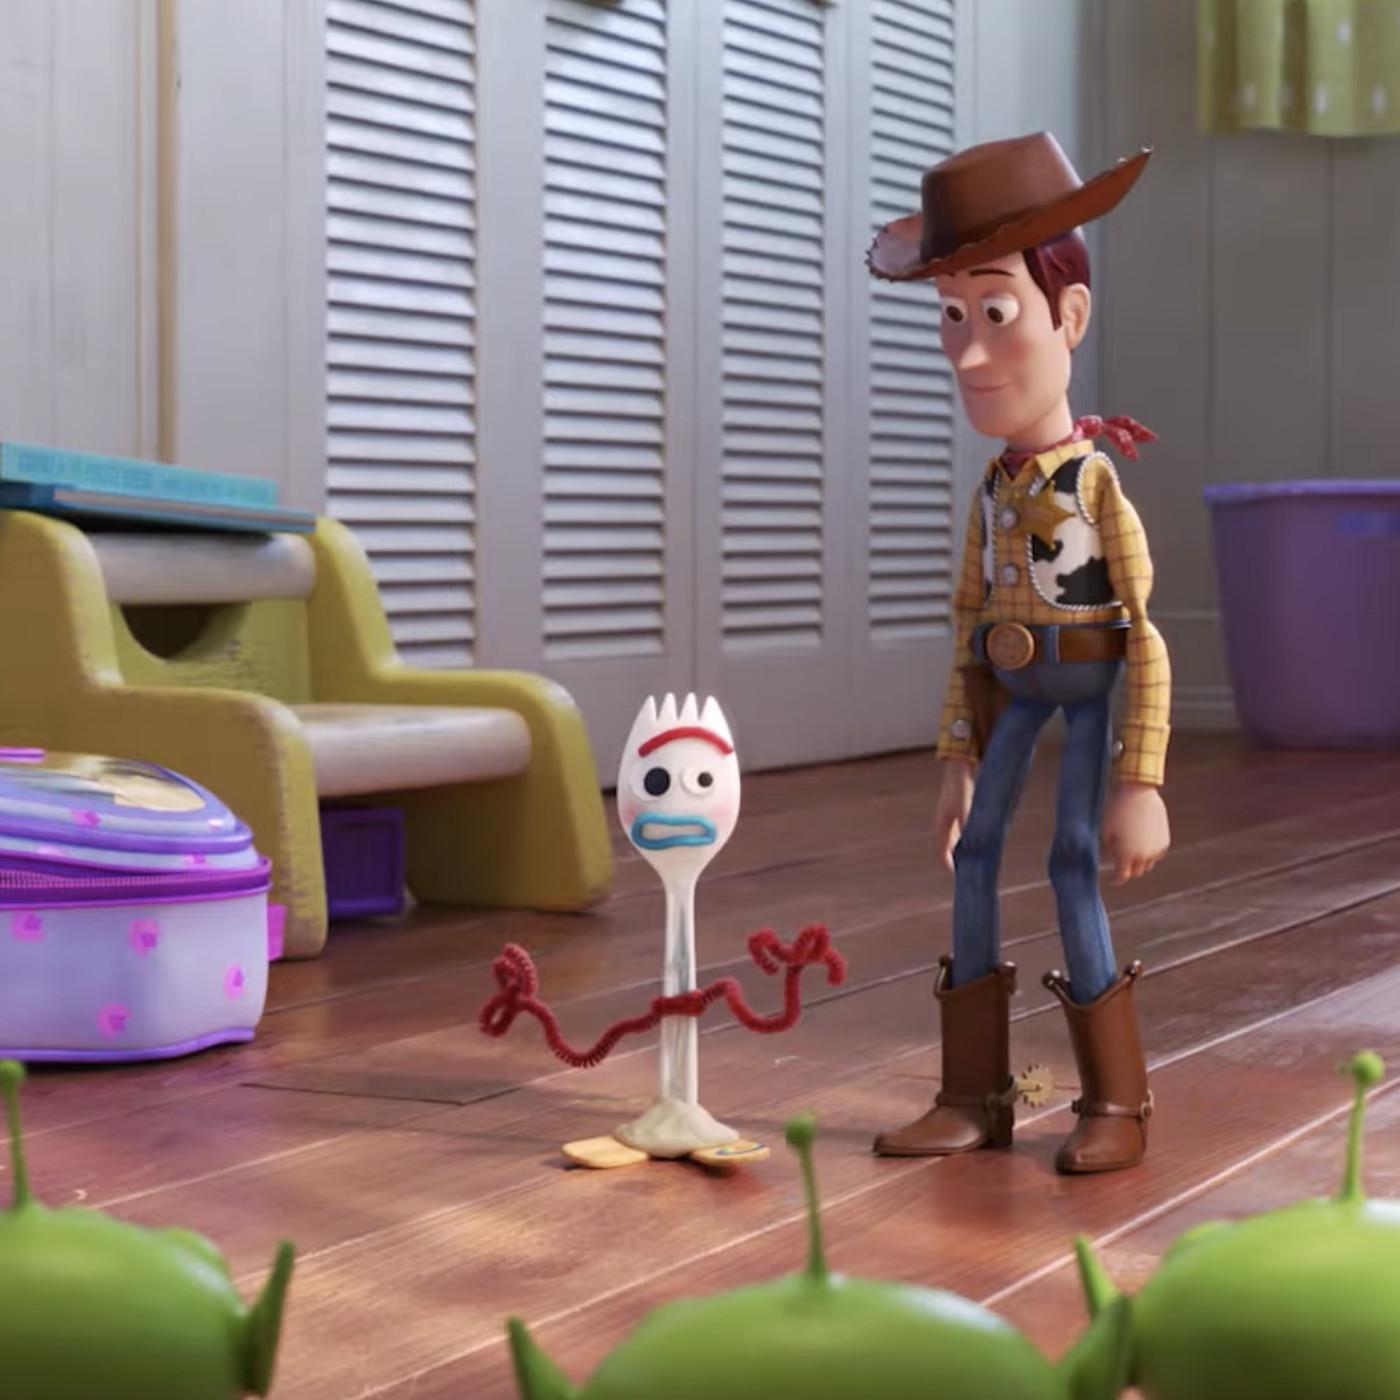 Toy Story 4's latest trailer proves that Pixar wants adults